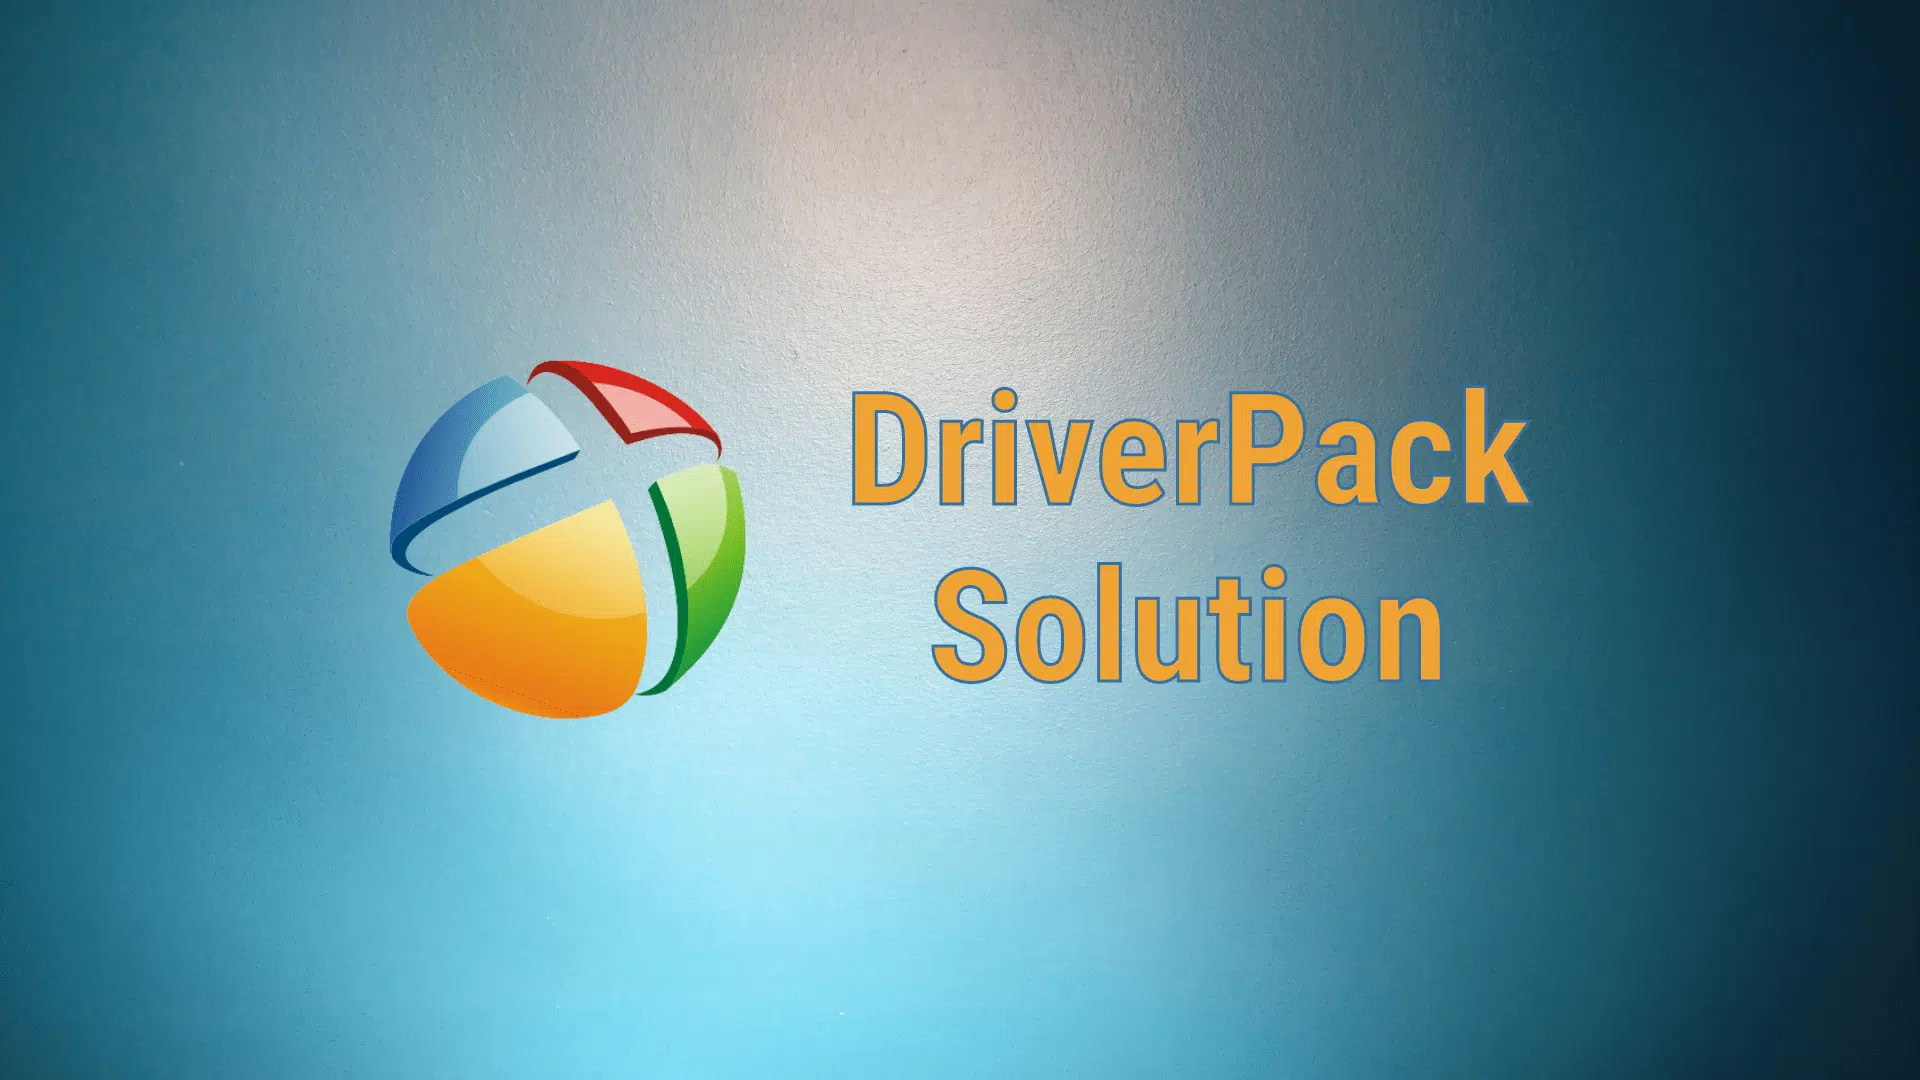 Introduction to DriverPack Solution